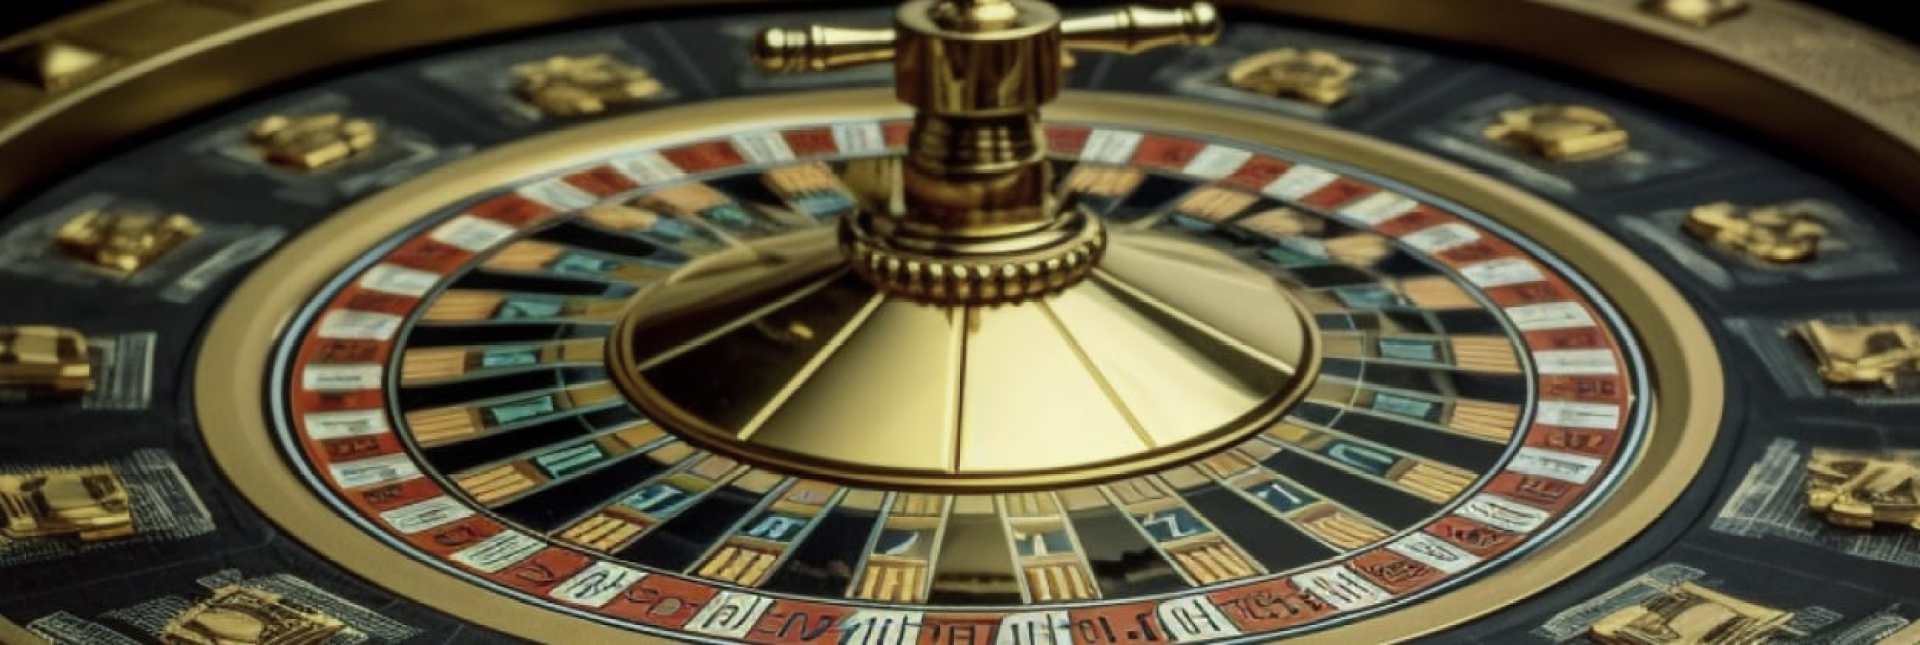 How you play with bitcoin on the roulette wheel